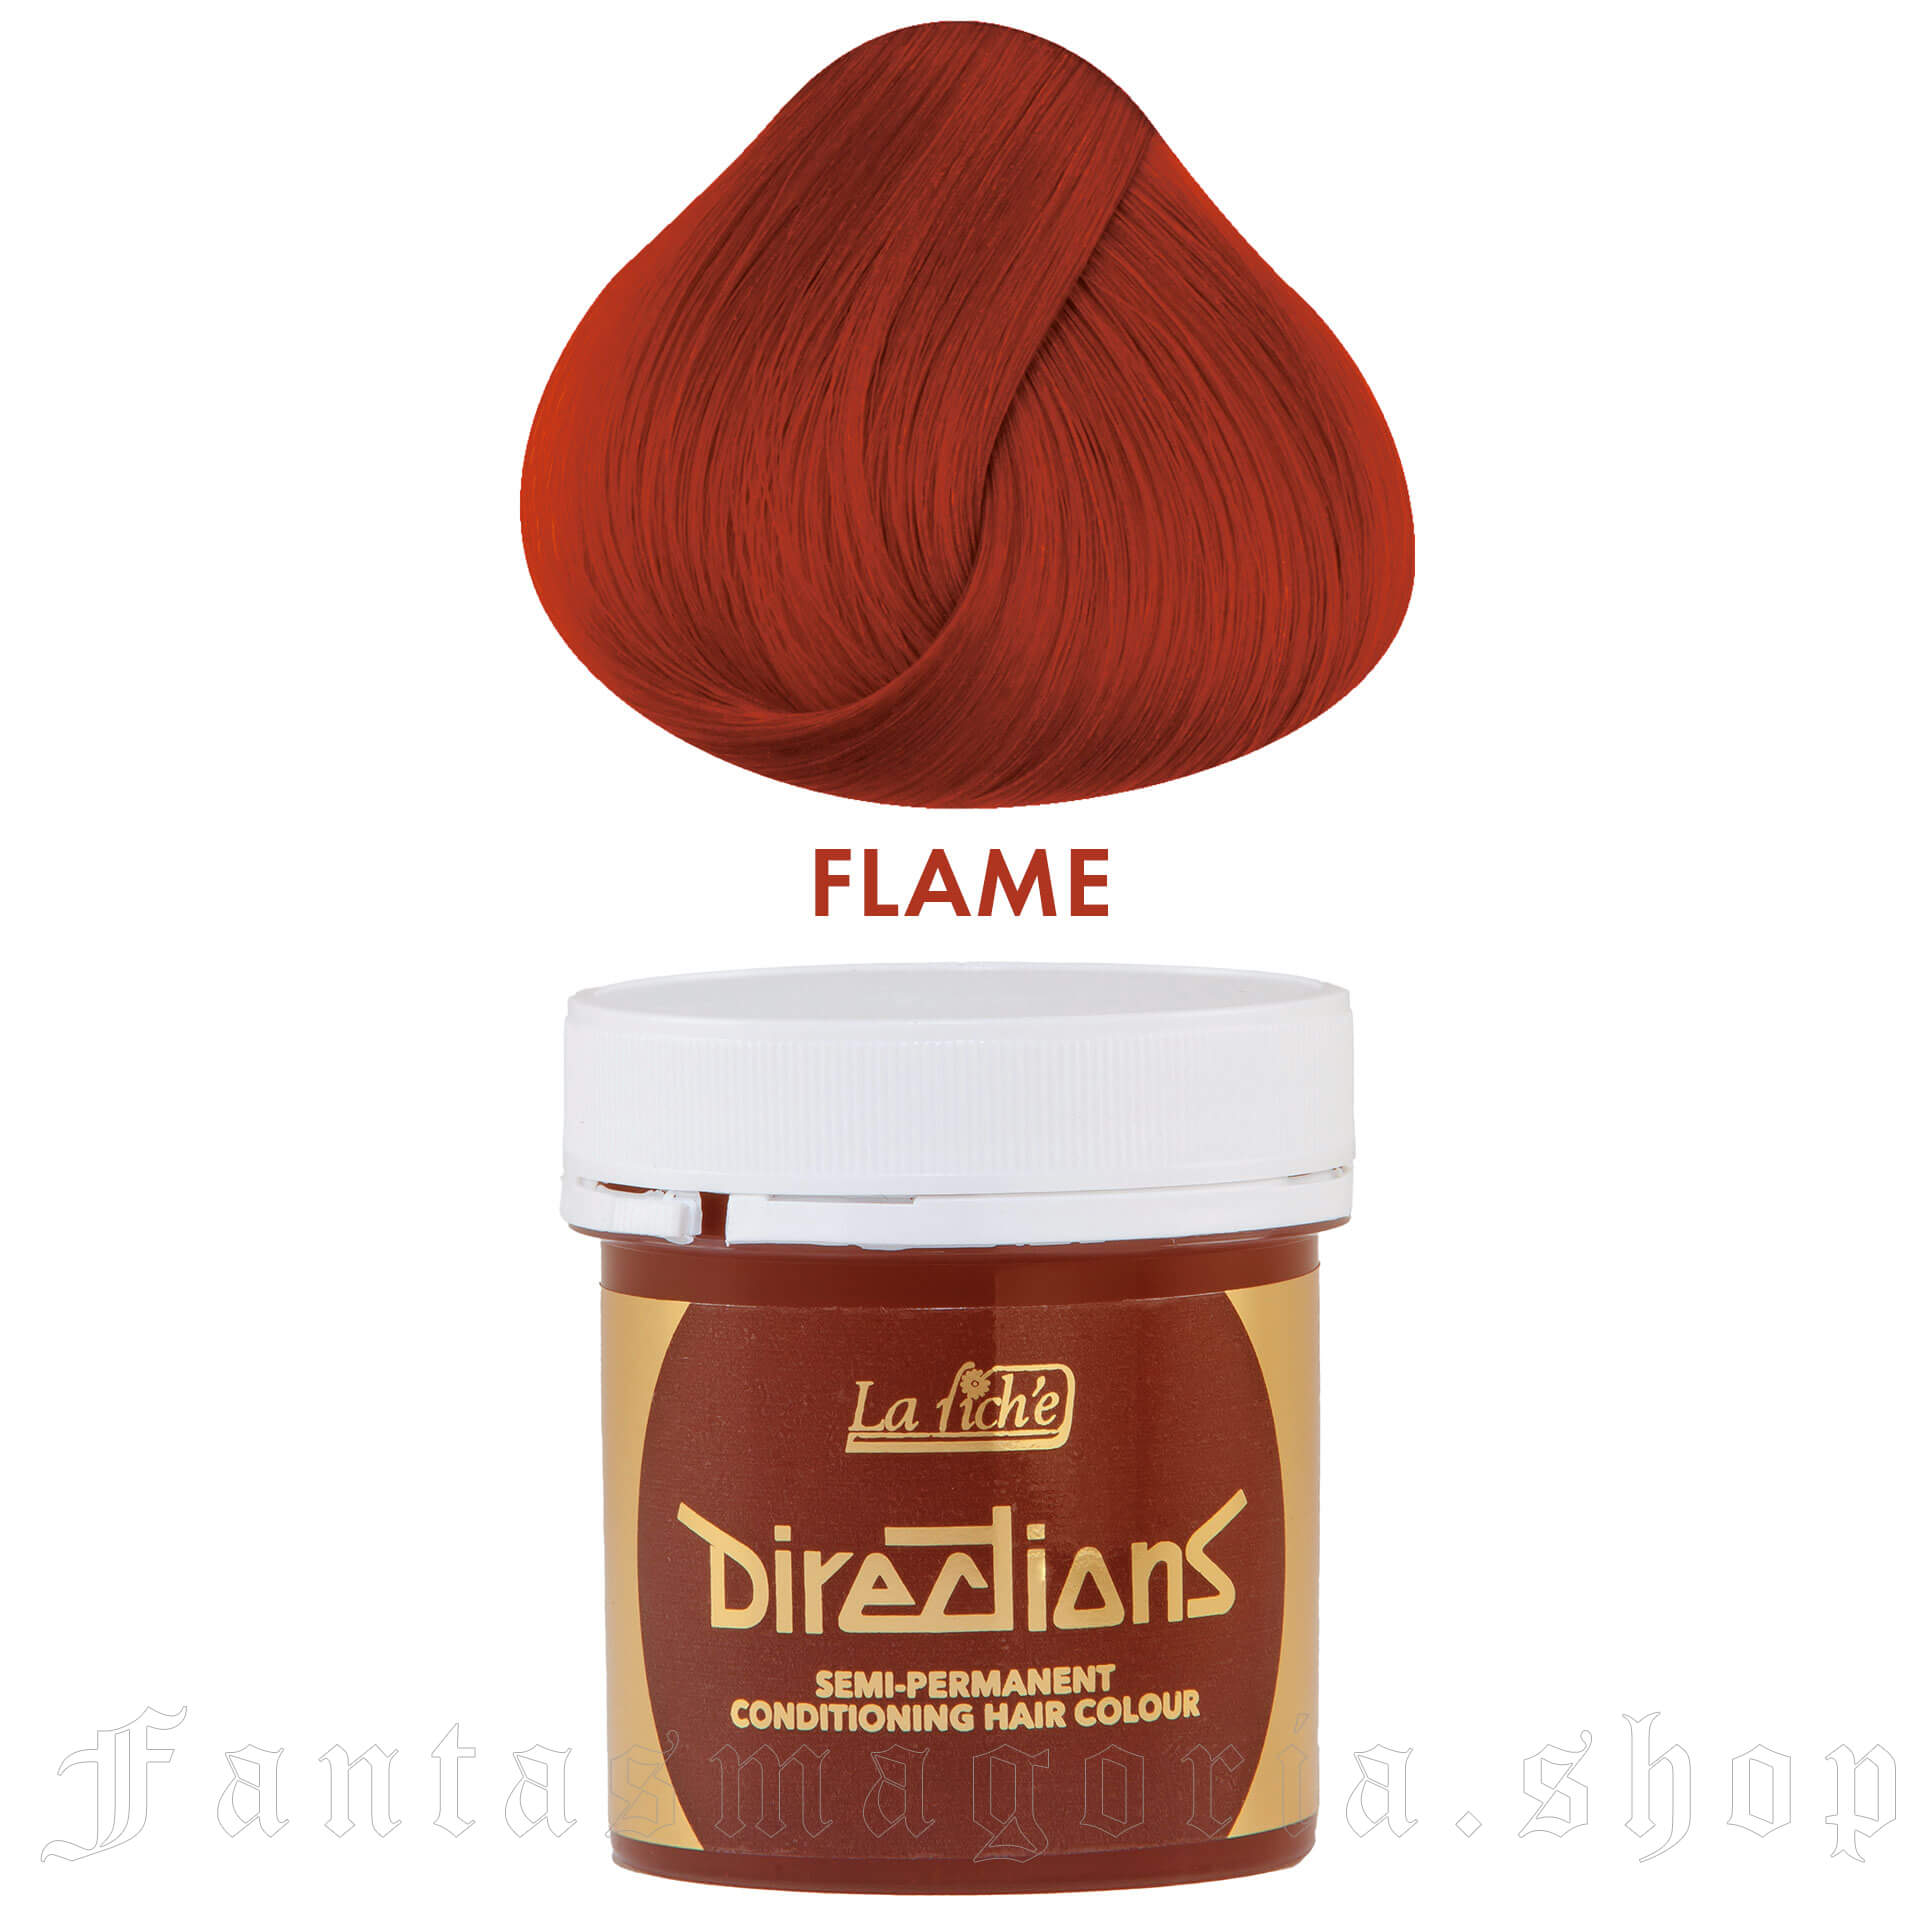 Flame Hair Coloring Balsam - Directions - DIRECTIONS/FLAME 1